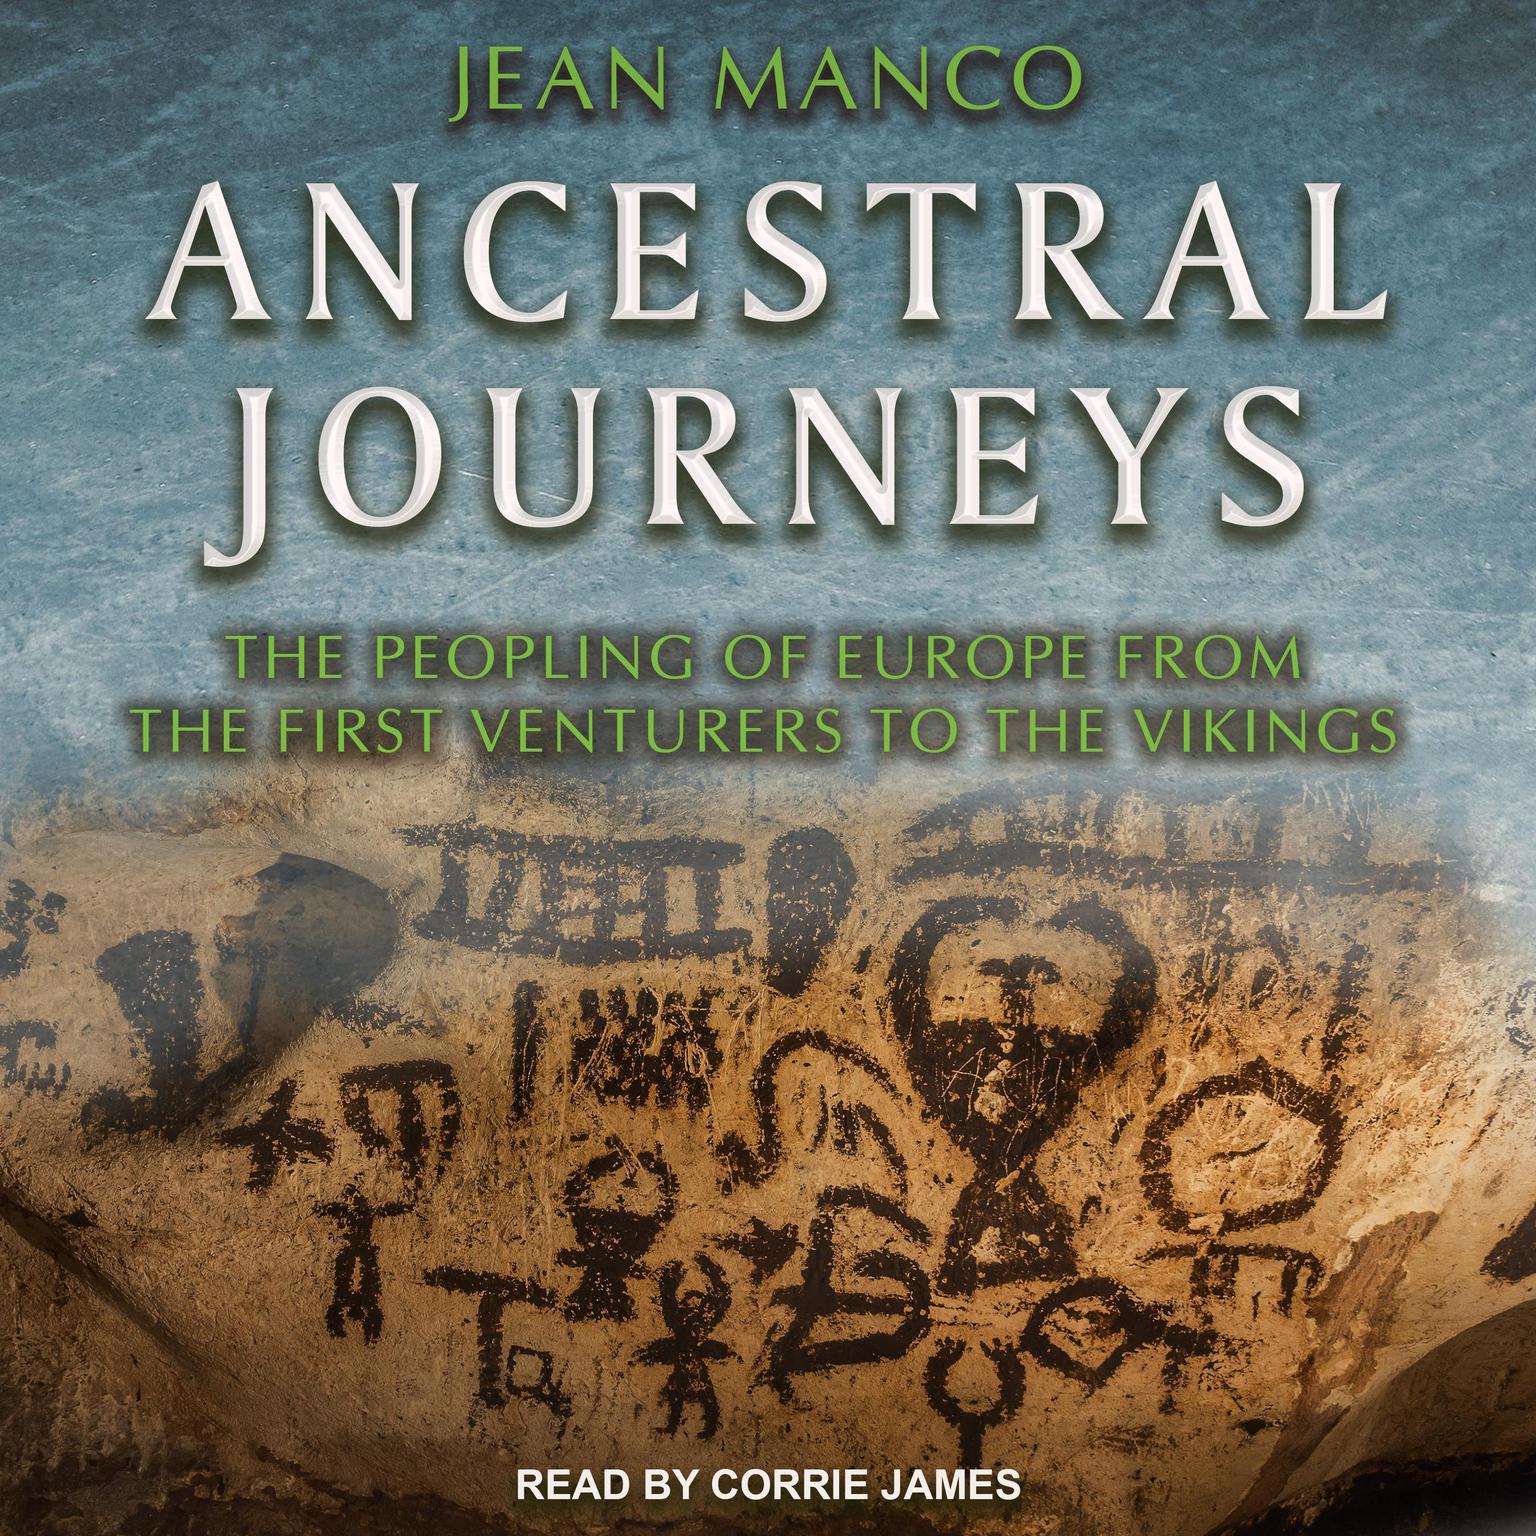 Ancestral Journeys: The Peopling of Europe from the First Venturers to the Vikings (Revised and Updated Edition) Audiobook, by Jean Manco